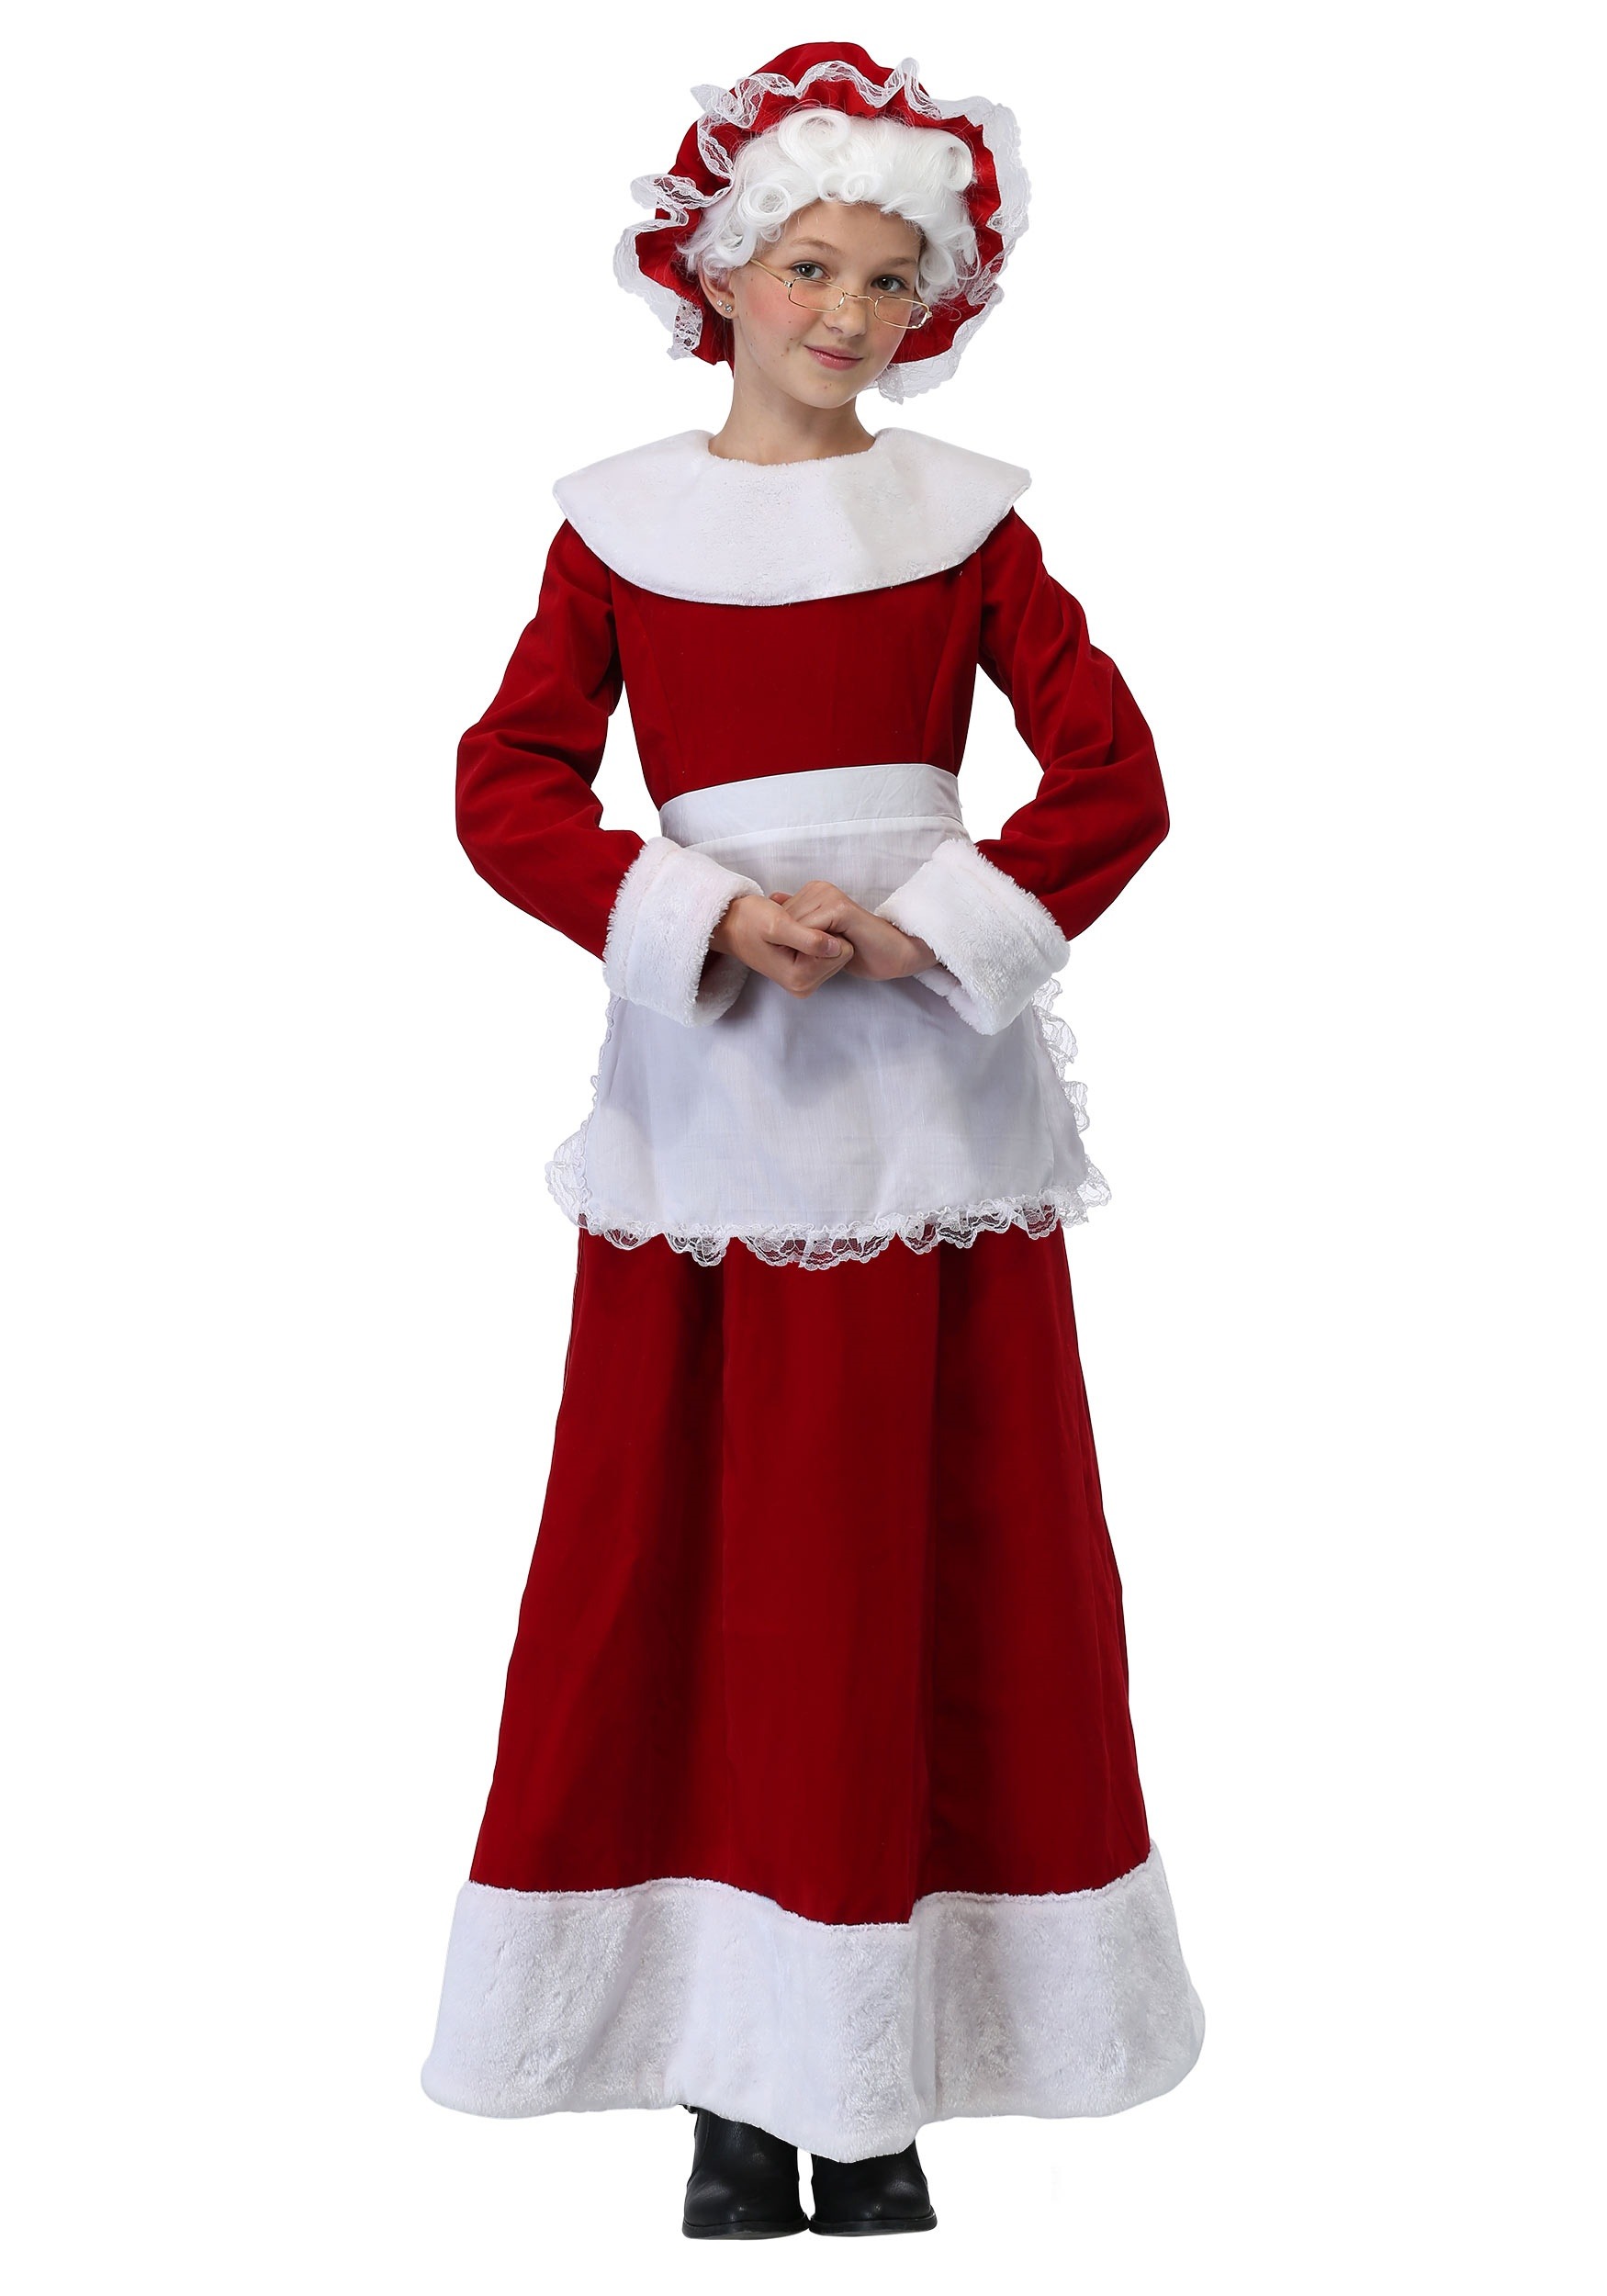 Mrs. Claus Costume for Girls